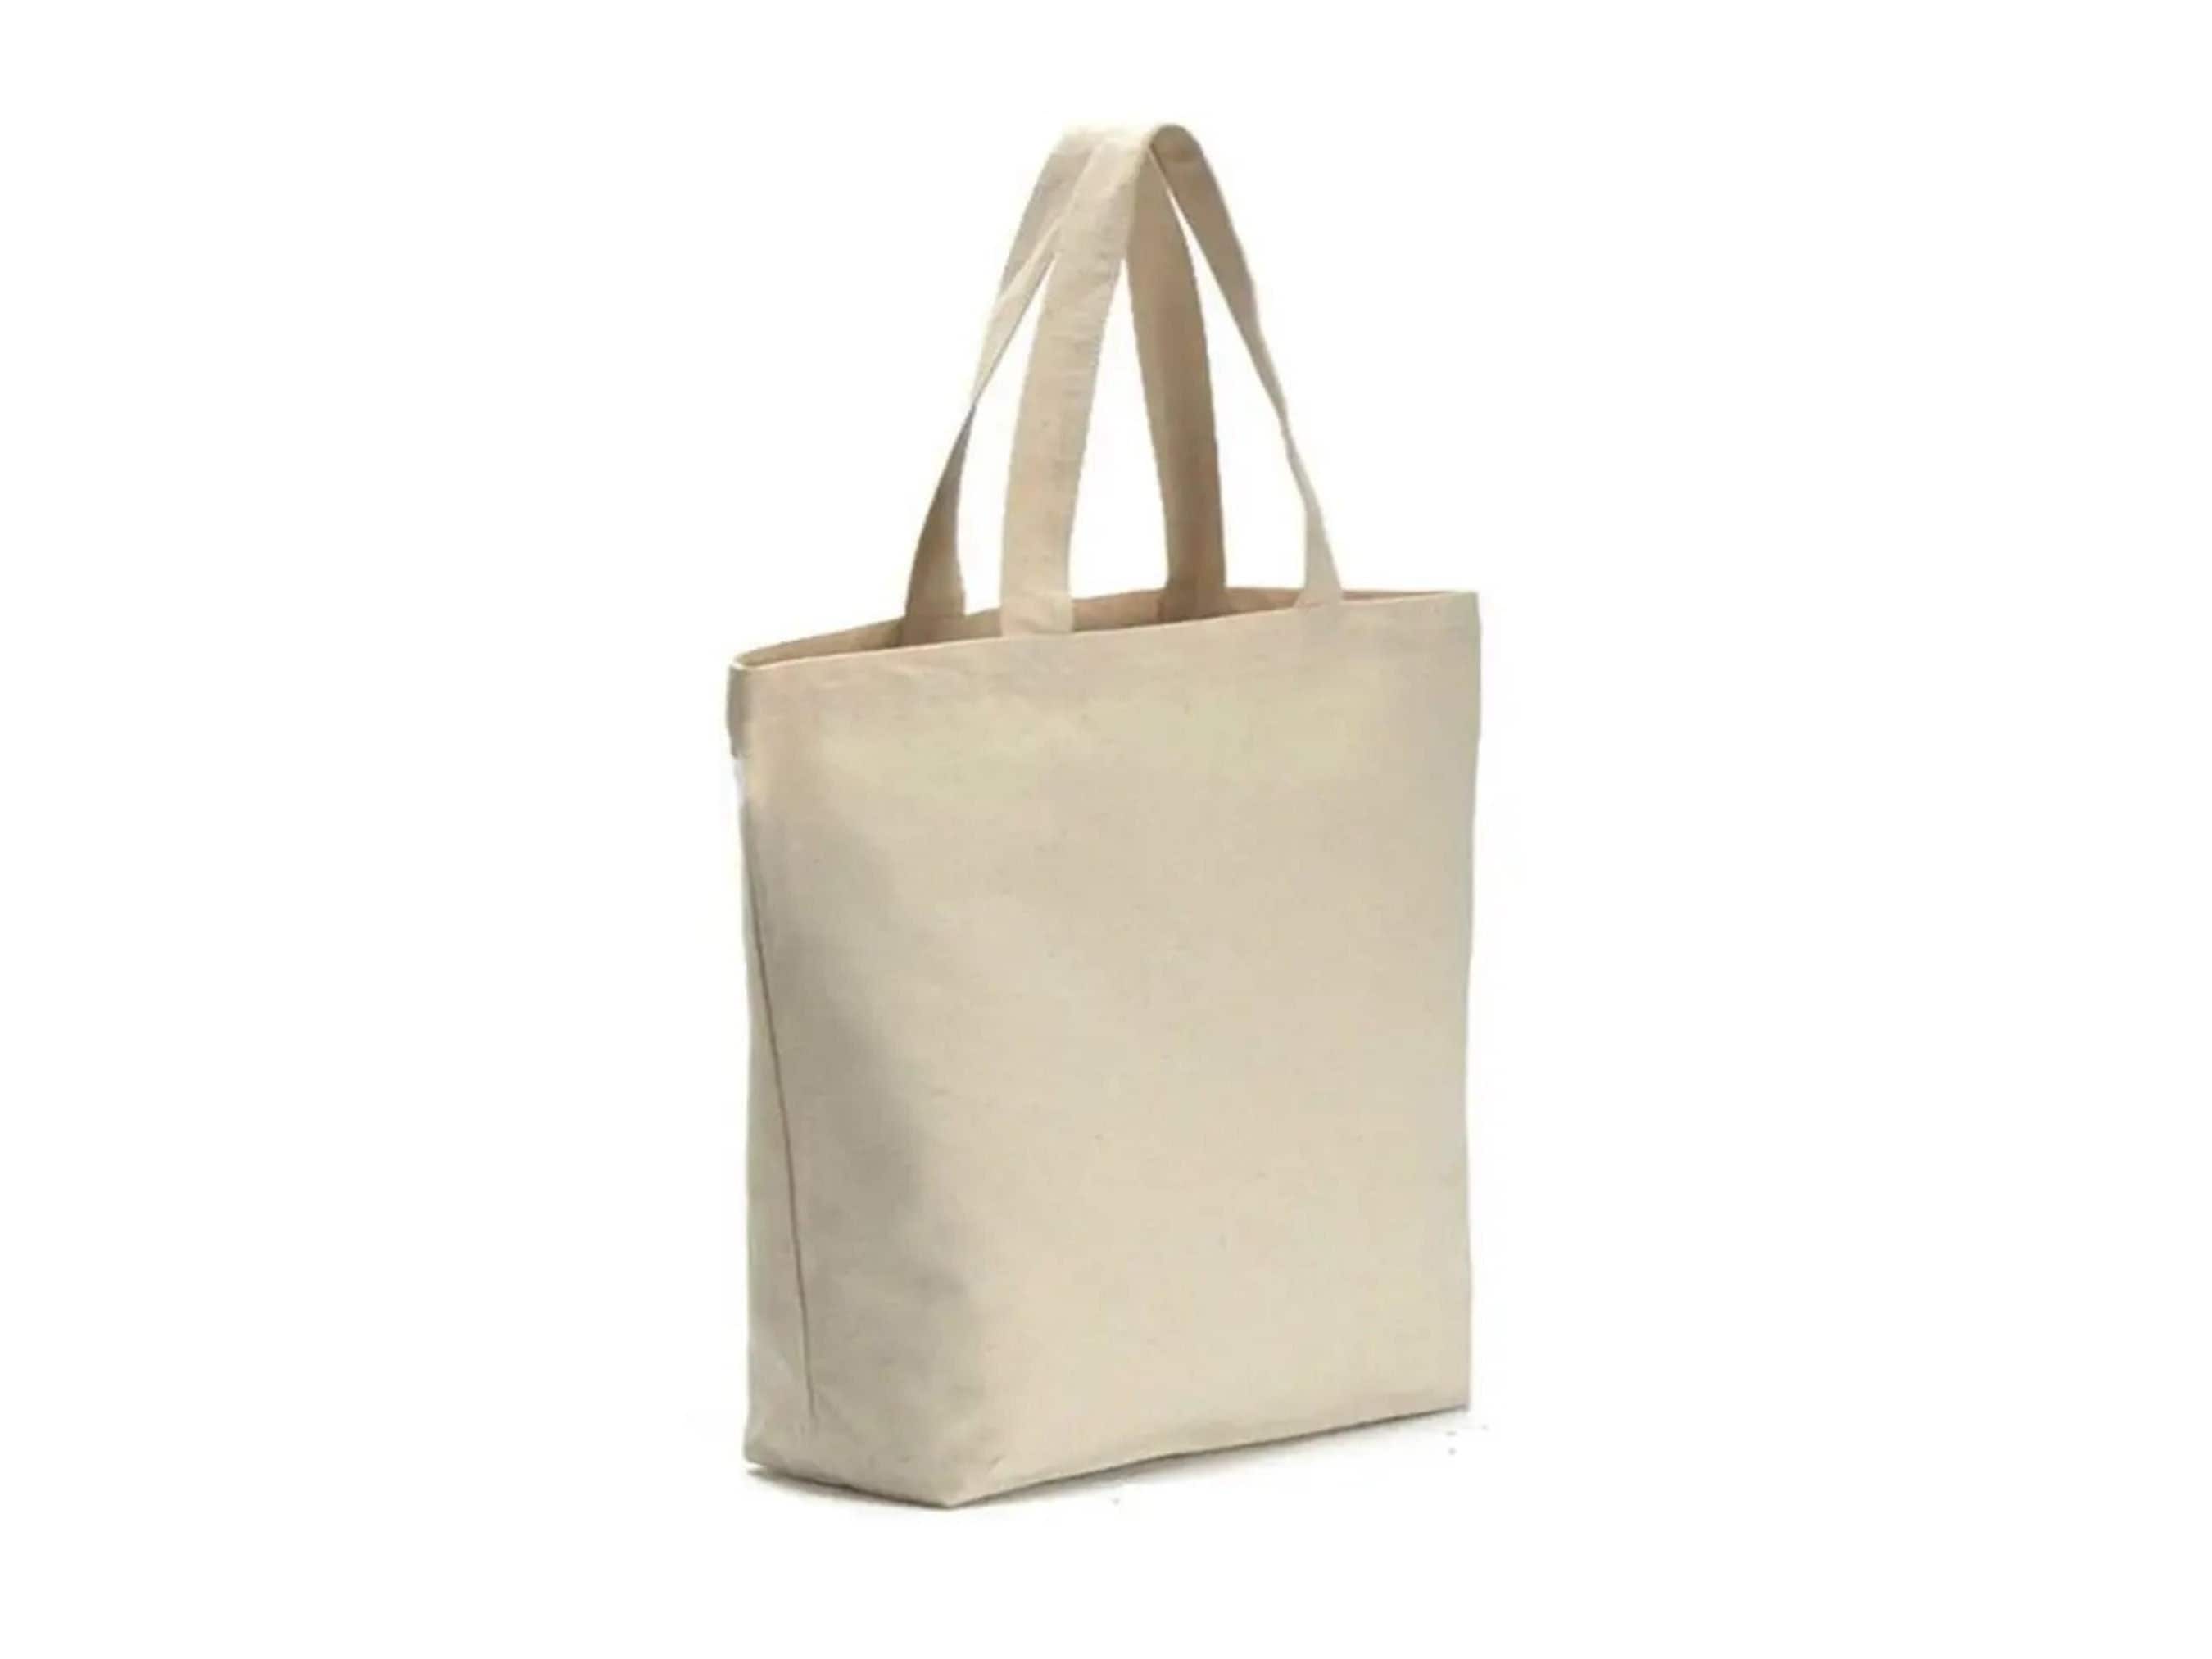 Blank Canvas Tote Bag 100% Cotton Canvas Tote Bag Heavy Duty Grocery ...